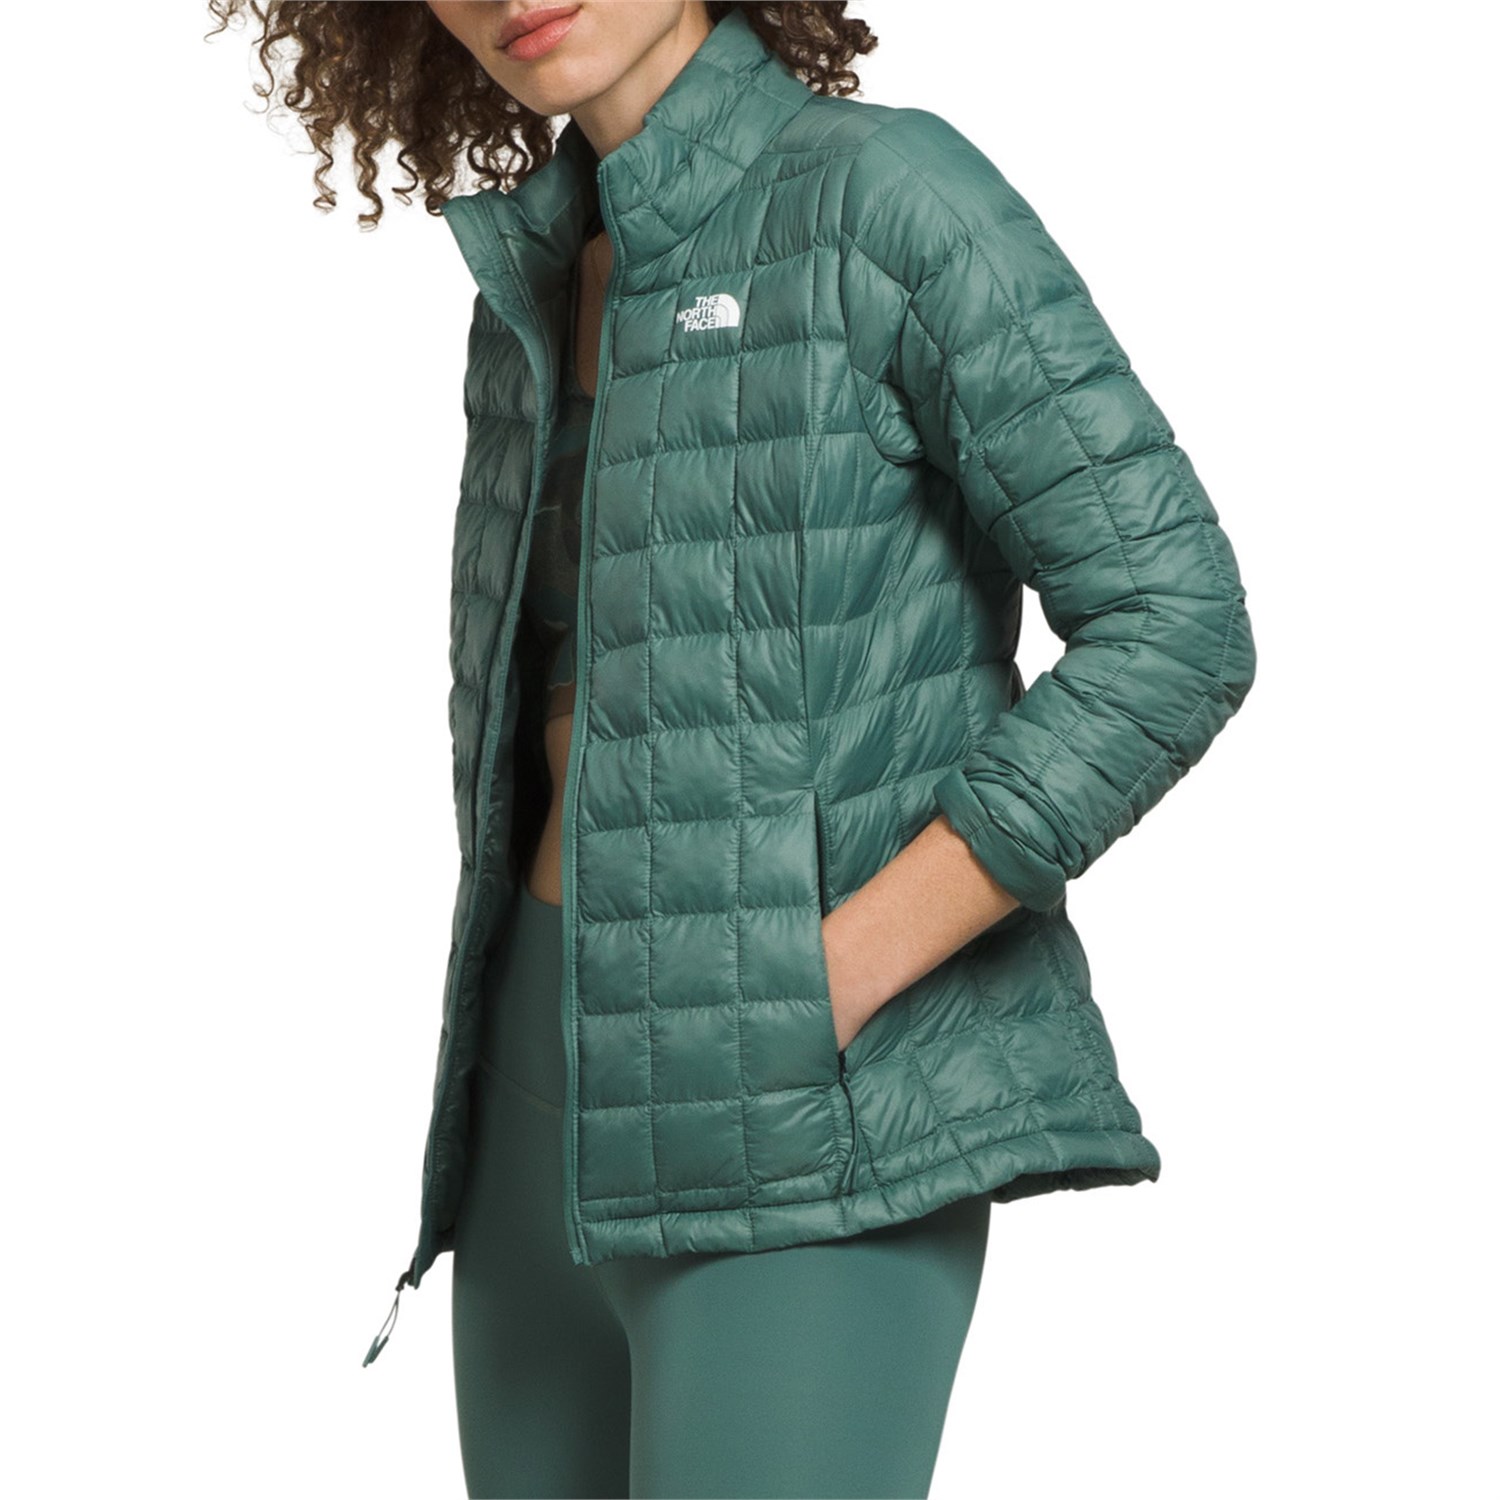 Куртка The North Face ThermoBall Eco, цвет Dark Sage куртка the north face thermoball eco 2 0 plus цвет dark sage